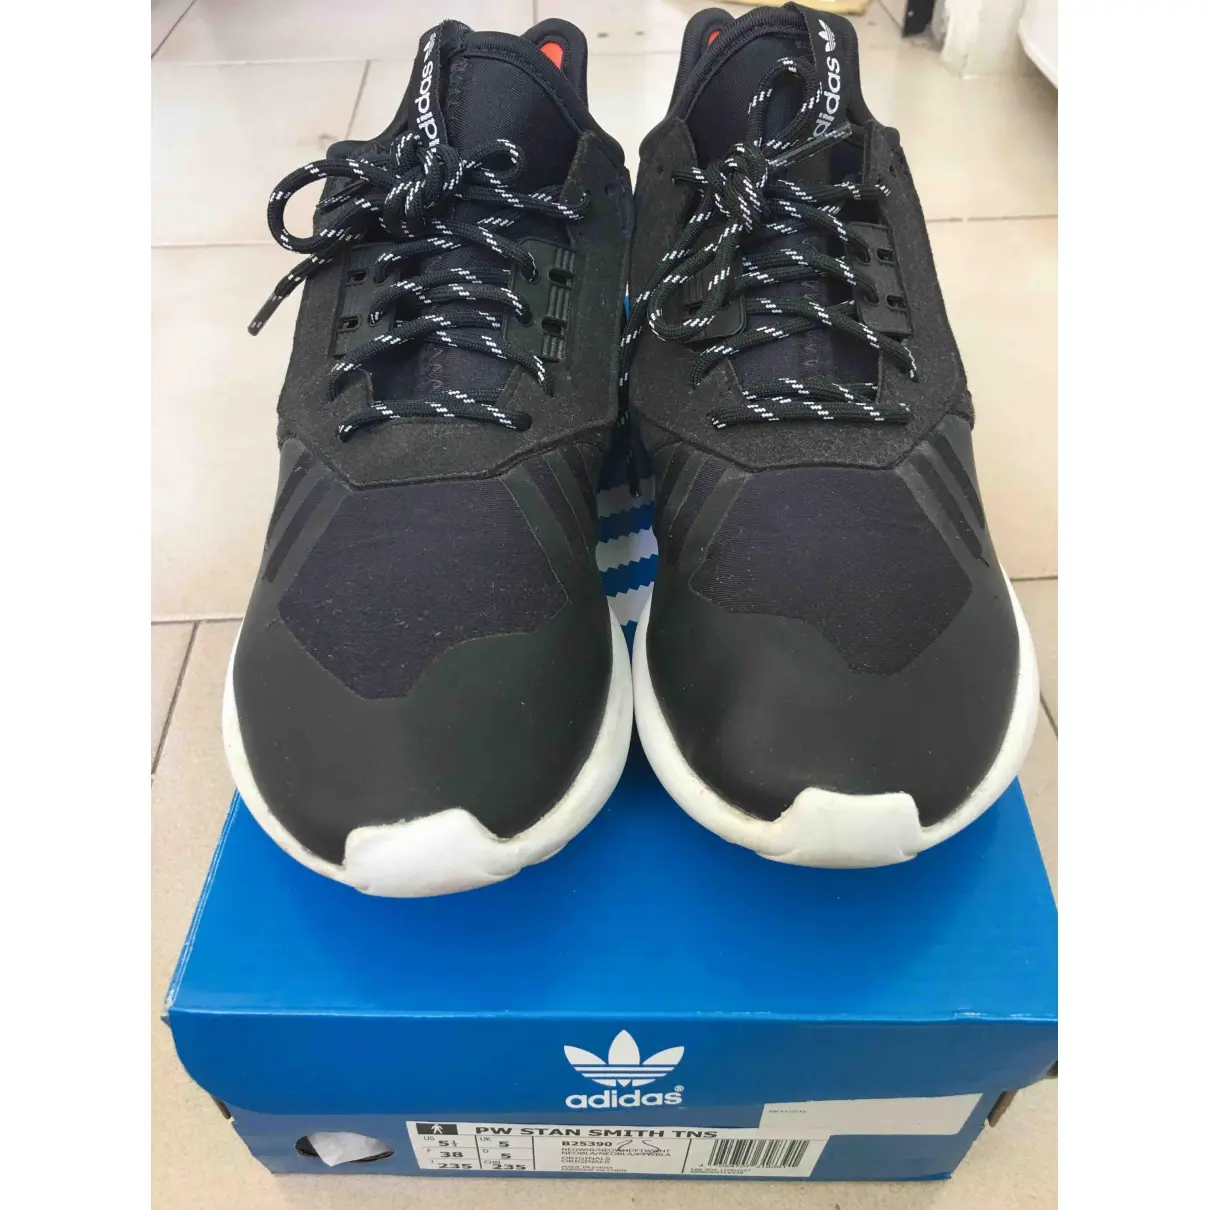 Adidas Tubular leather trainers for sale